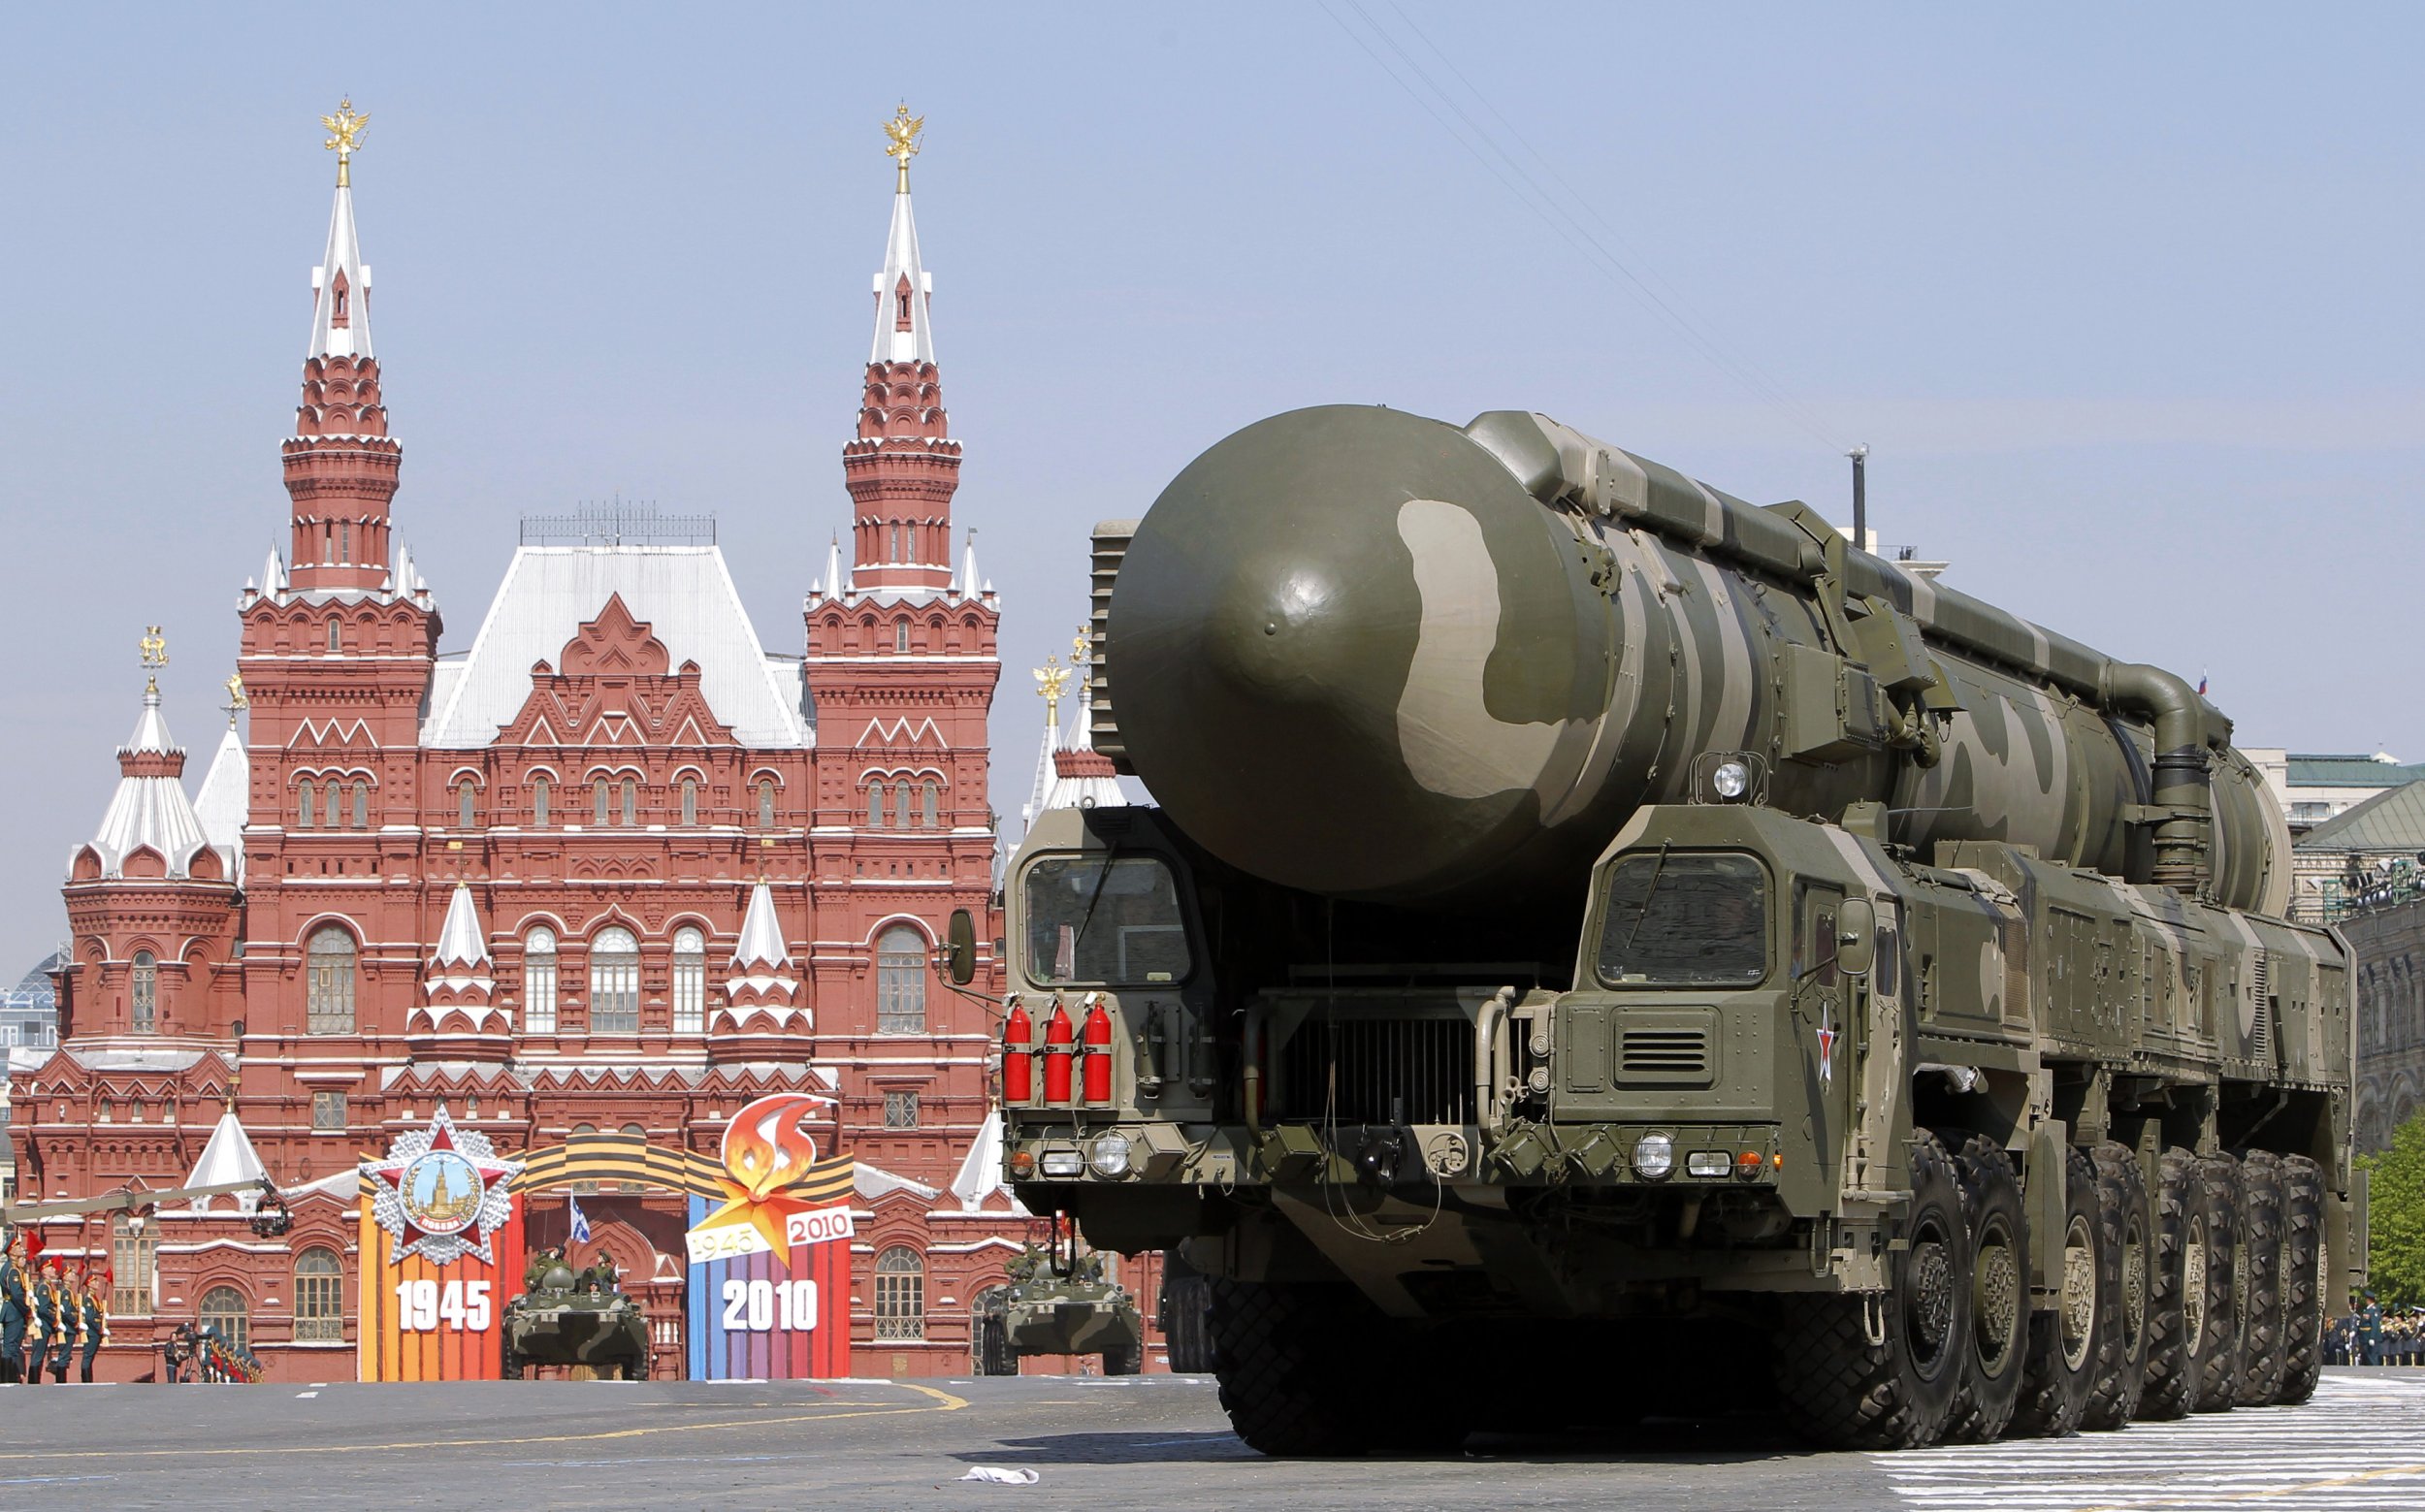 Russian missile launcher